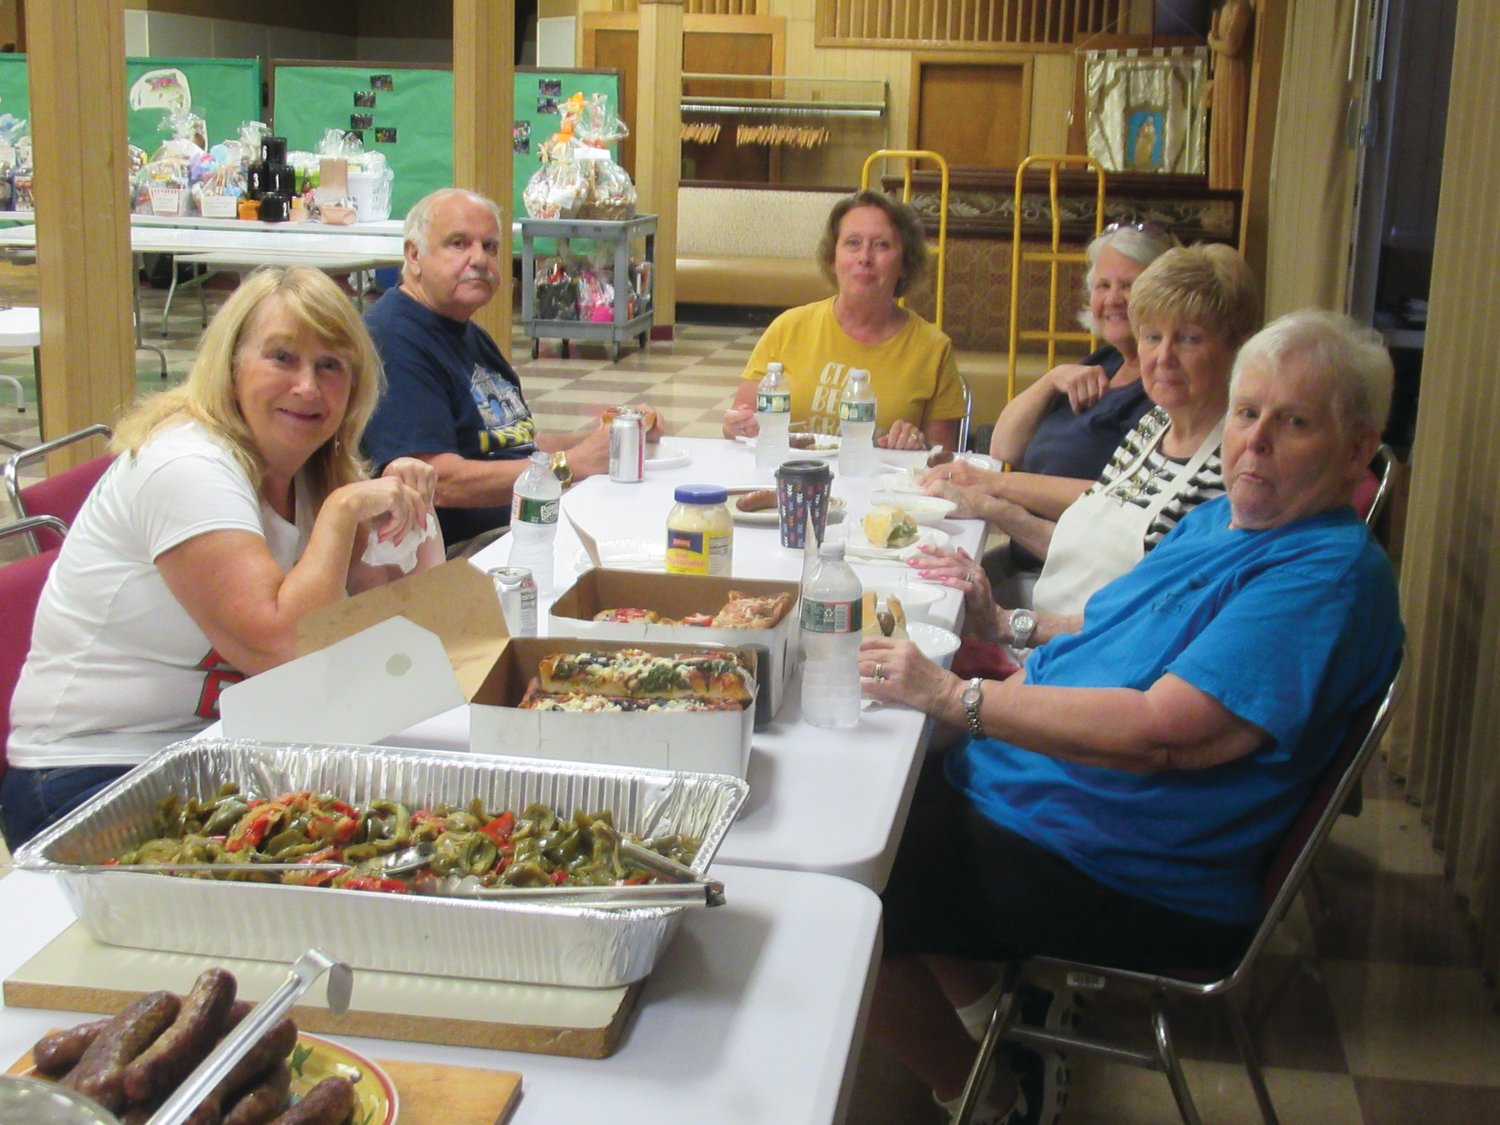 BURLEY’S BUDDIES: OLG Feast and Festival Chairwoman Joanne Burley (top center) is joined by Linda Bessette, Dom Rogue, Margie Rogue, Marilyn Domenico and Betsy Reilly who enjoyed a luncheon during Tuesday’s work session.